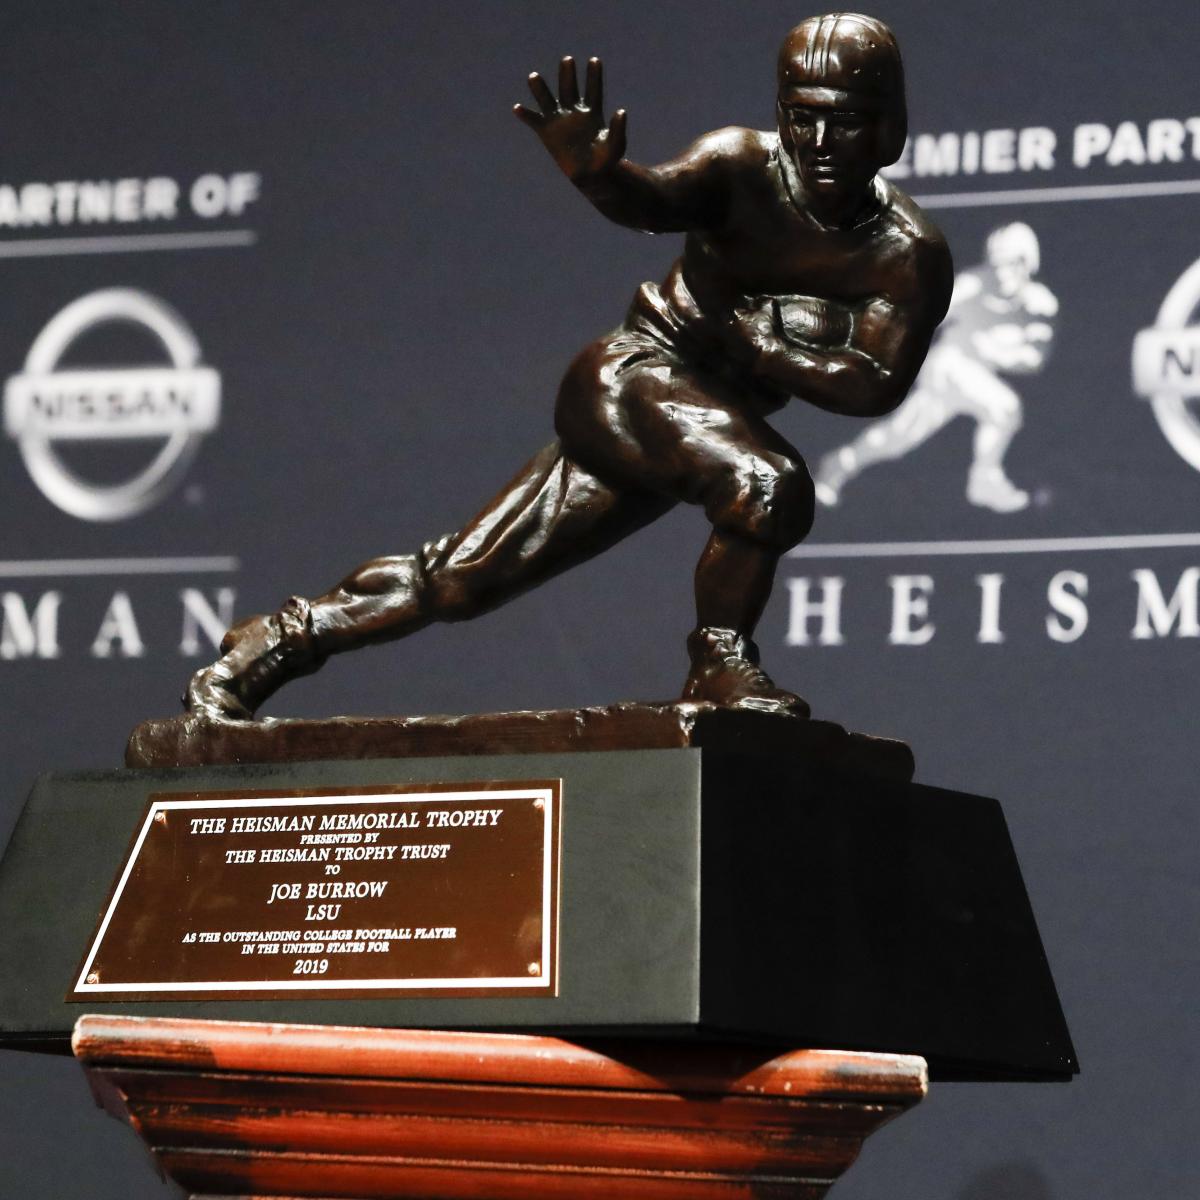 2020 Heisman Trophy Ceremony to Be Held Virtually on Jan. 5 Amid COVID